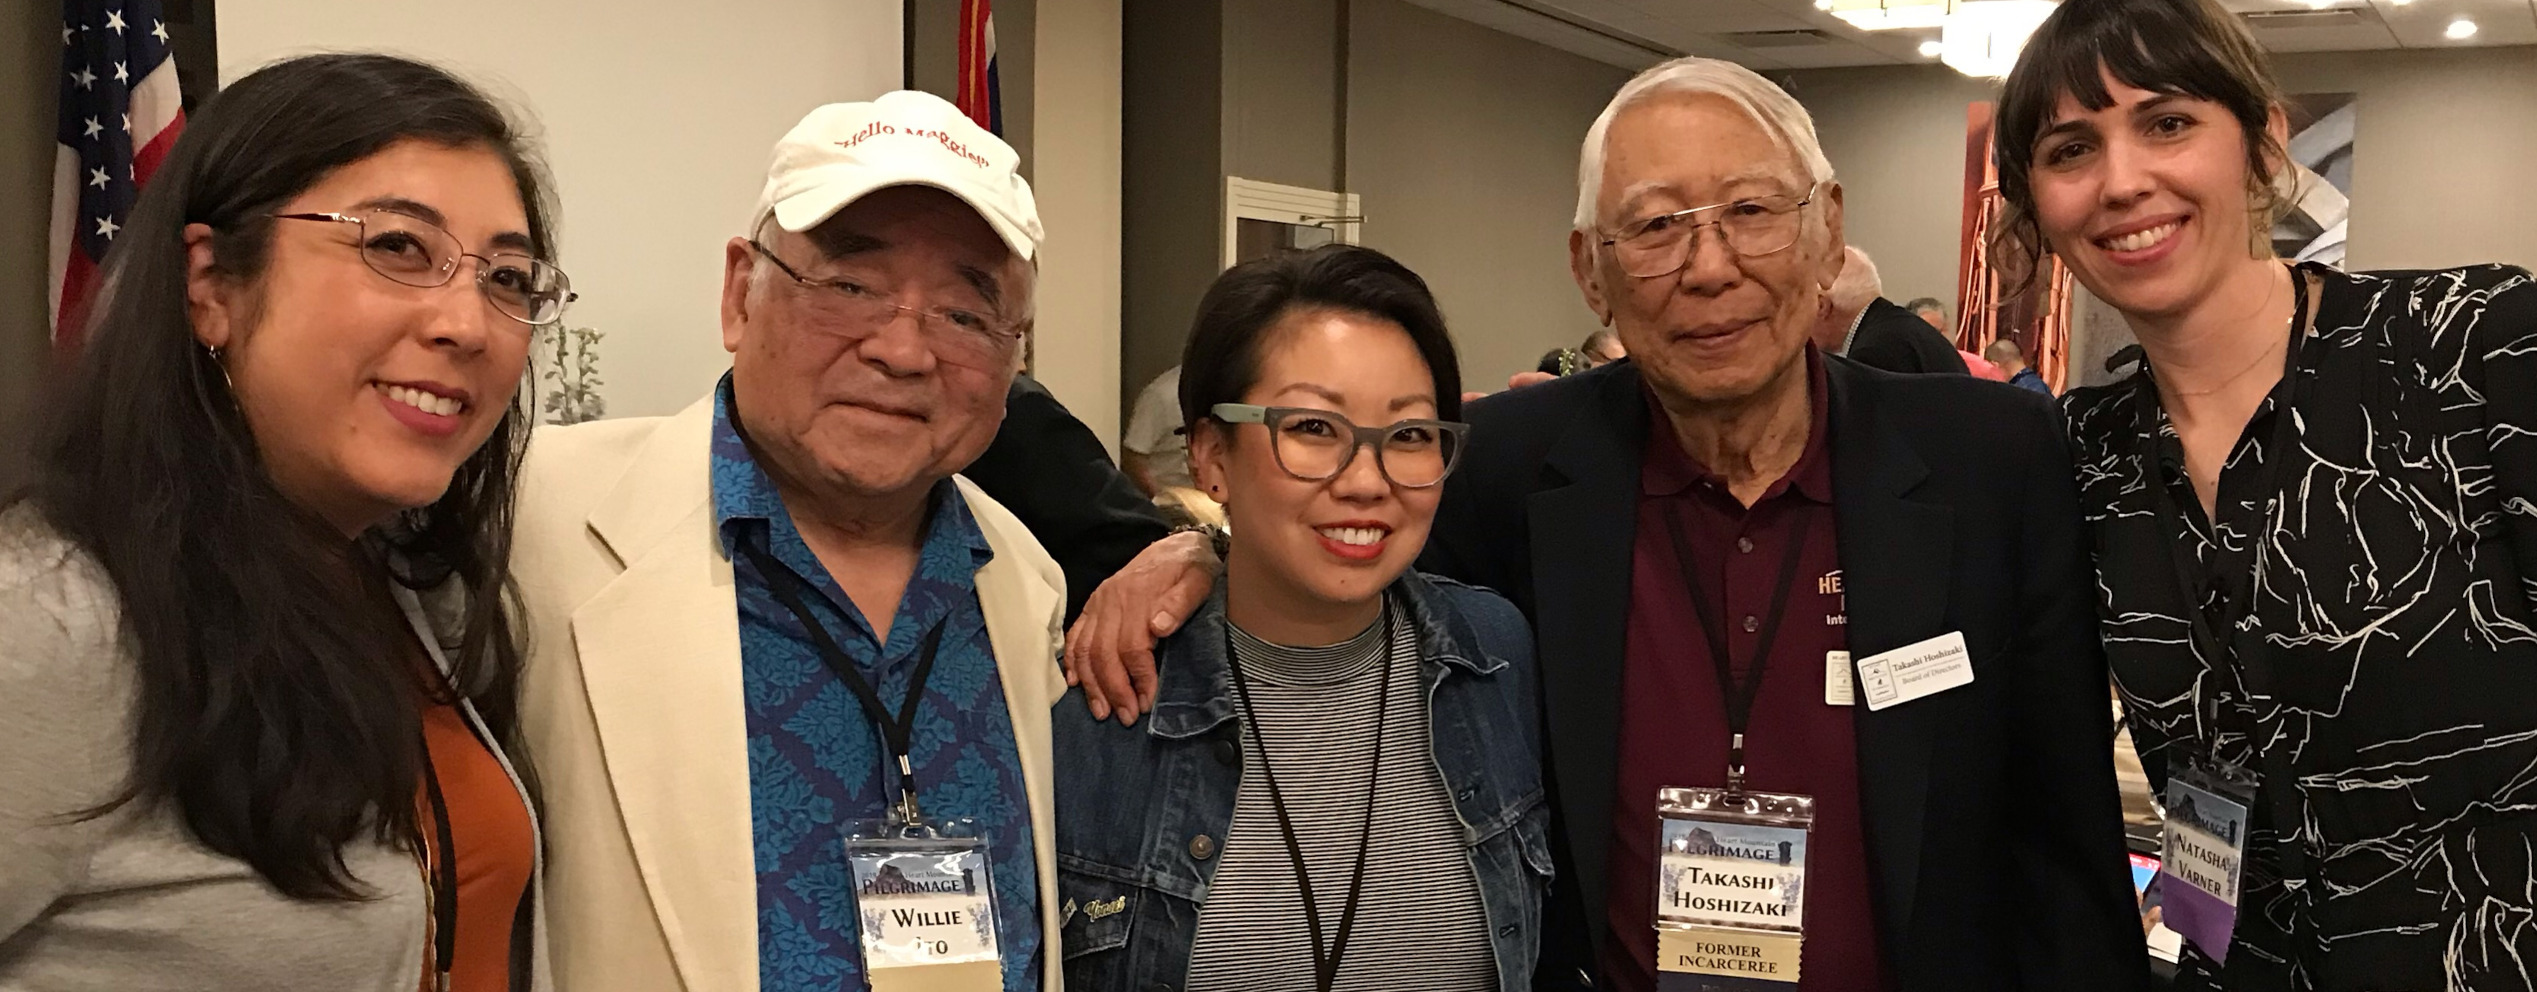 Danielle Higa with two Densho colleagues and community members at the 2019 Heart Mountain pilgrimage.